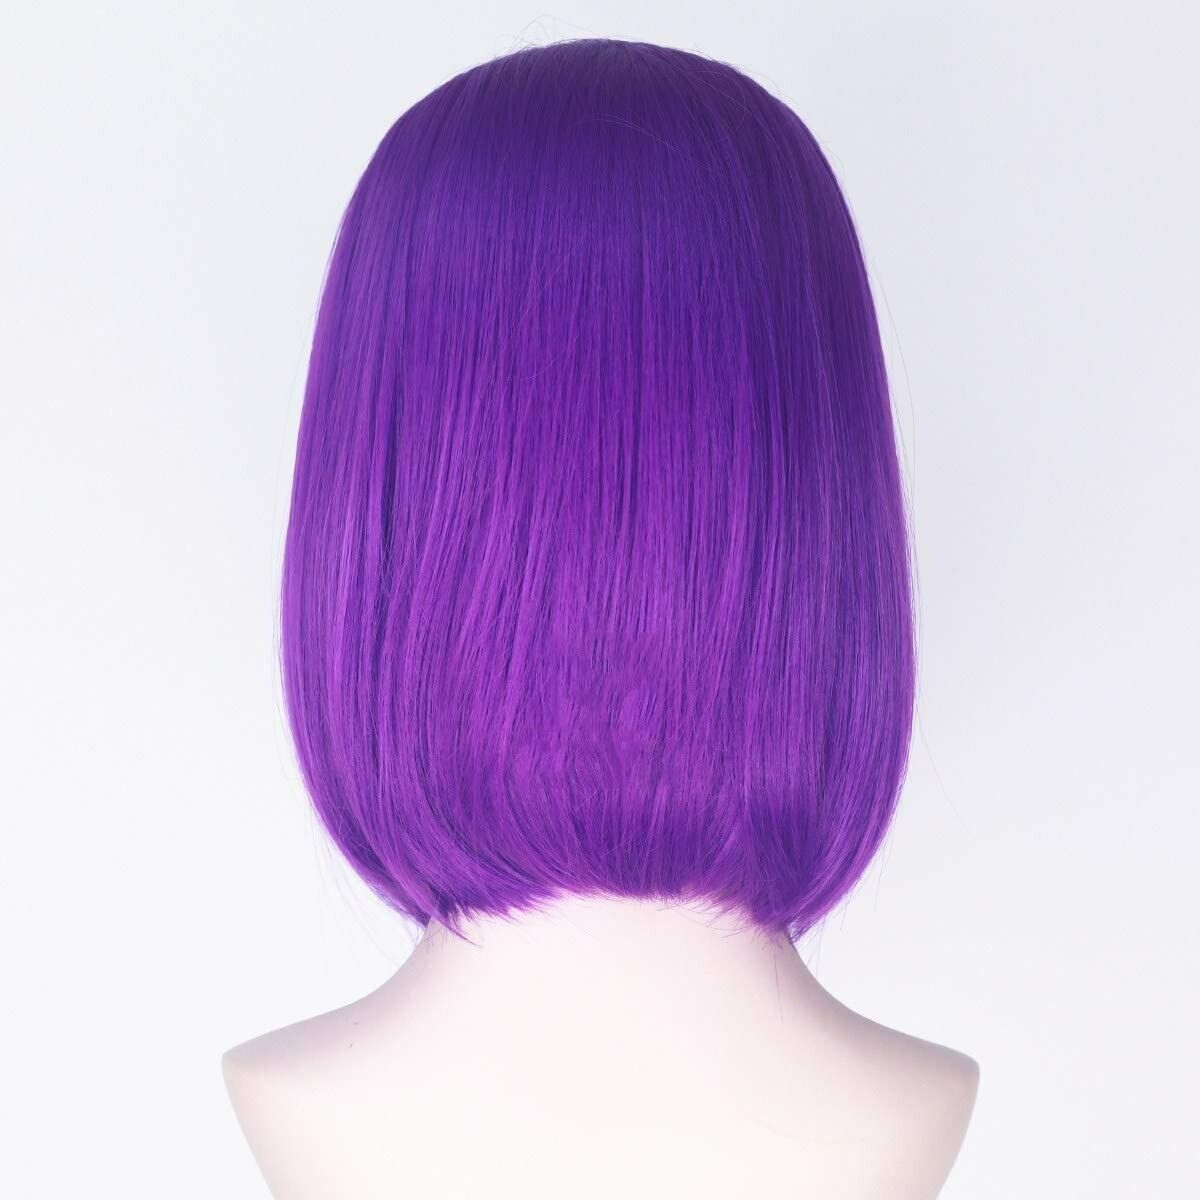 Blue Bird Bob Silk Straight Wig Synthetic Purple Hair with Natural Hairline